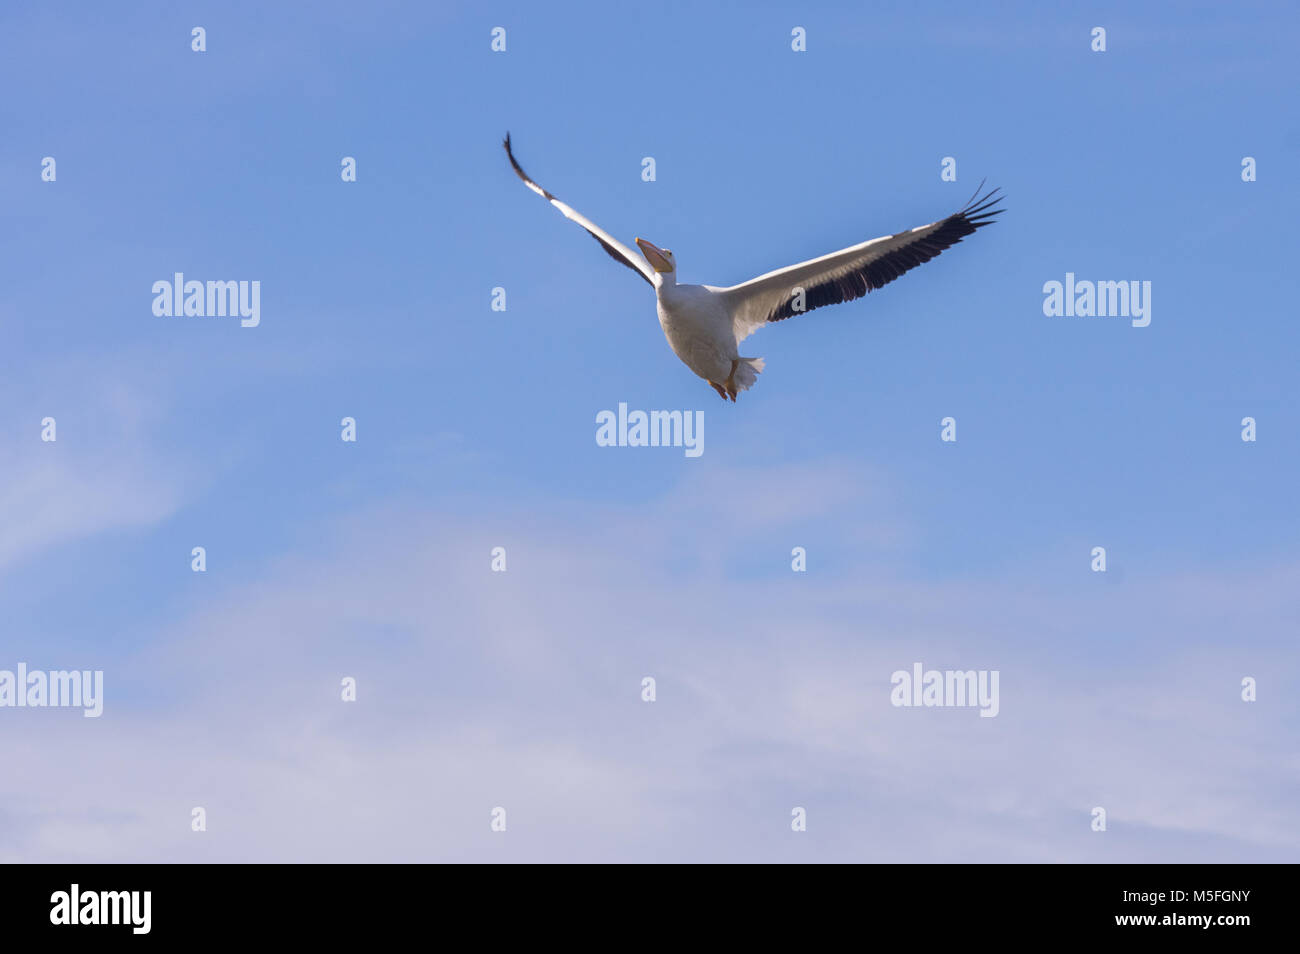 An American white pelican in flight against a blue sky. Stock Photo